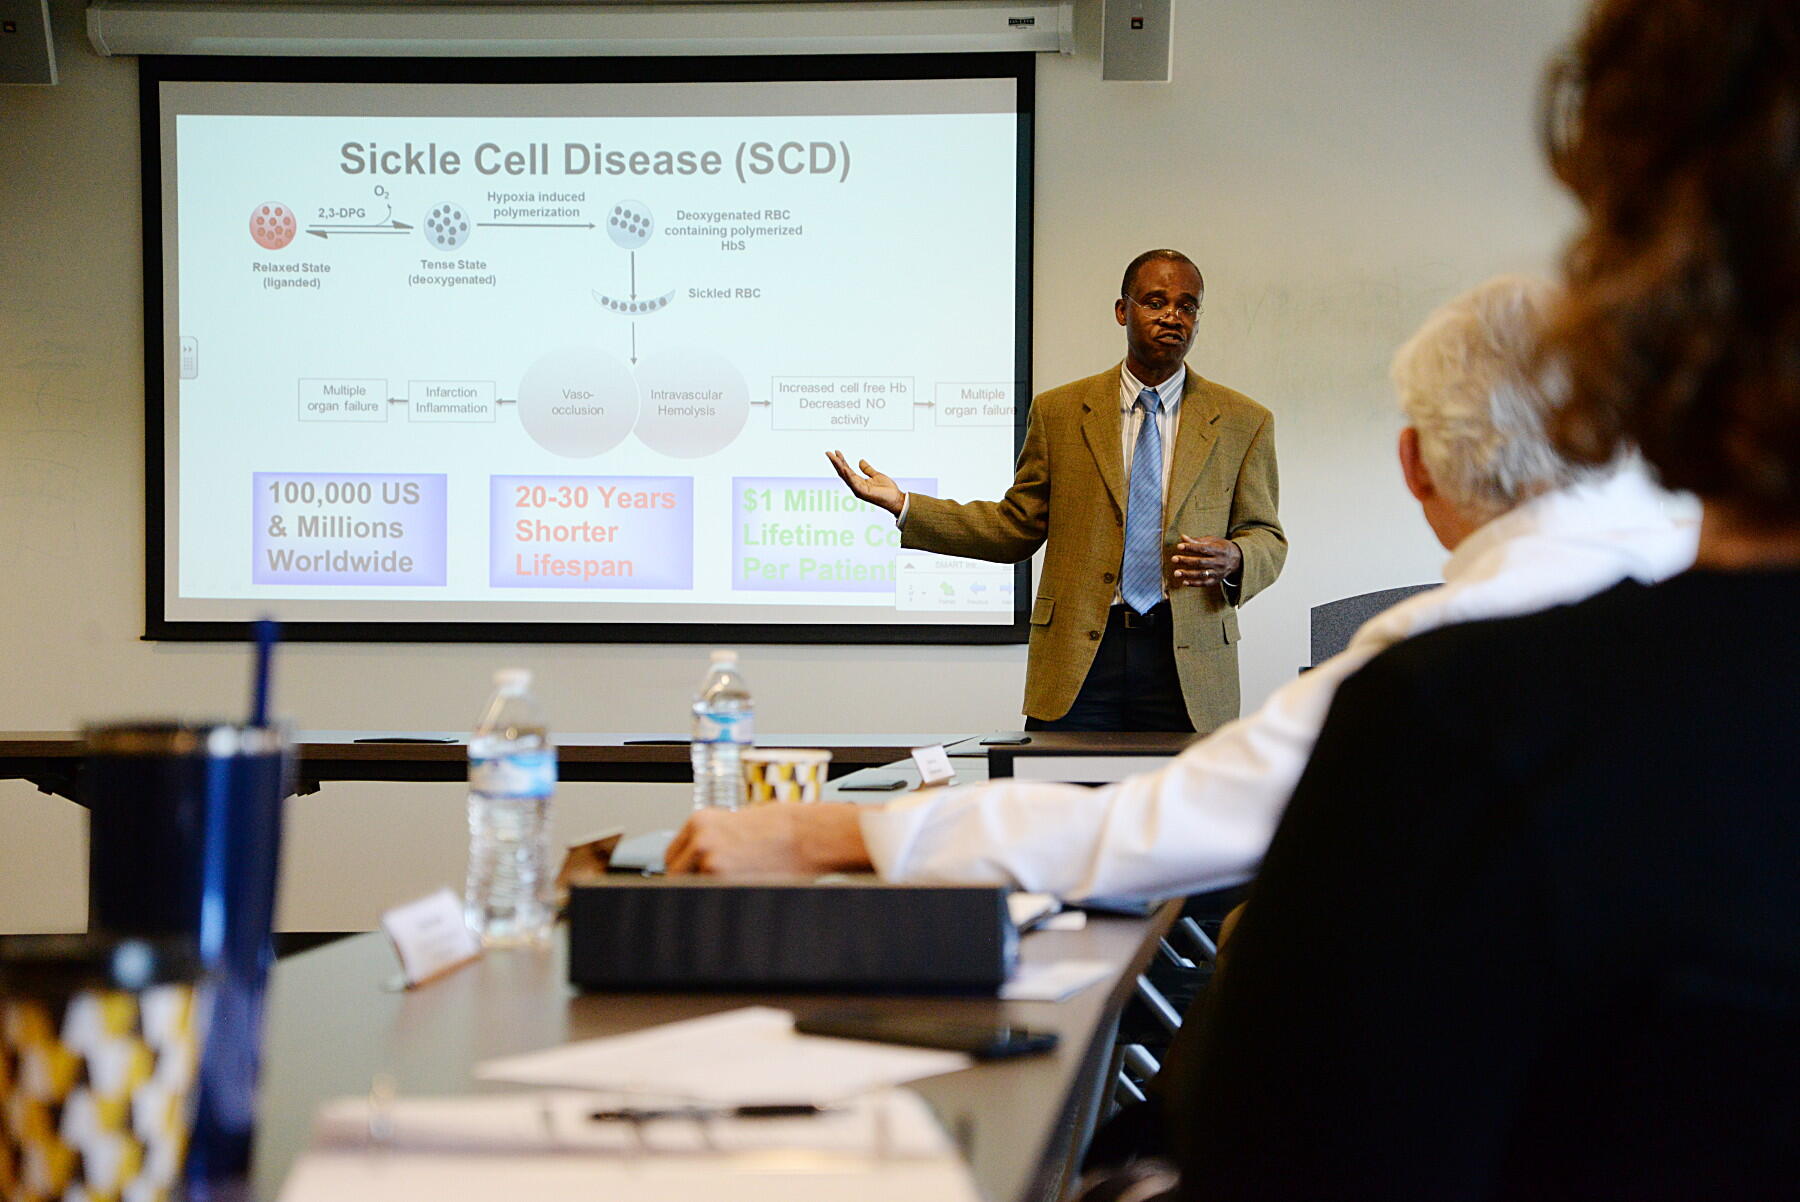 Martin Safo, Ph.D., a professor in the Department of Medicinal Chemistry in the School of Pharmacy, presents his proposal for the synthesis, formulation and PK/PD studies of novel synthetic antisickling agents. (Photos by Brian McNeill)

